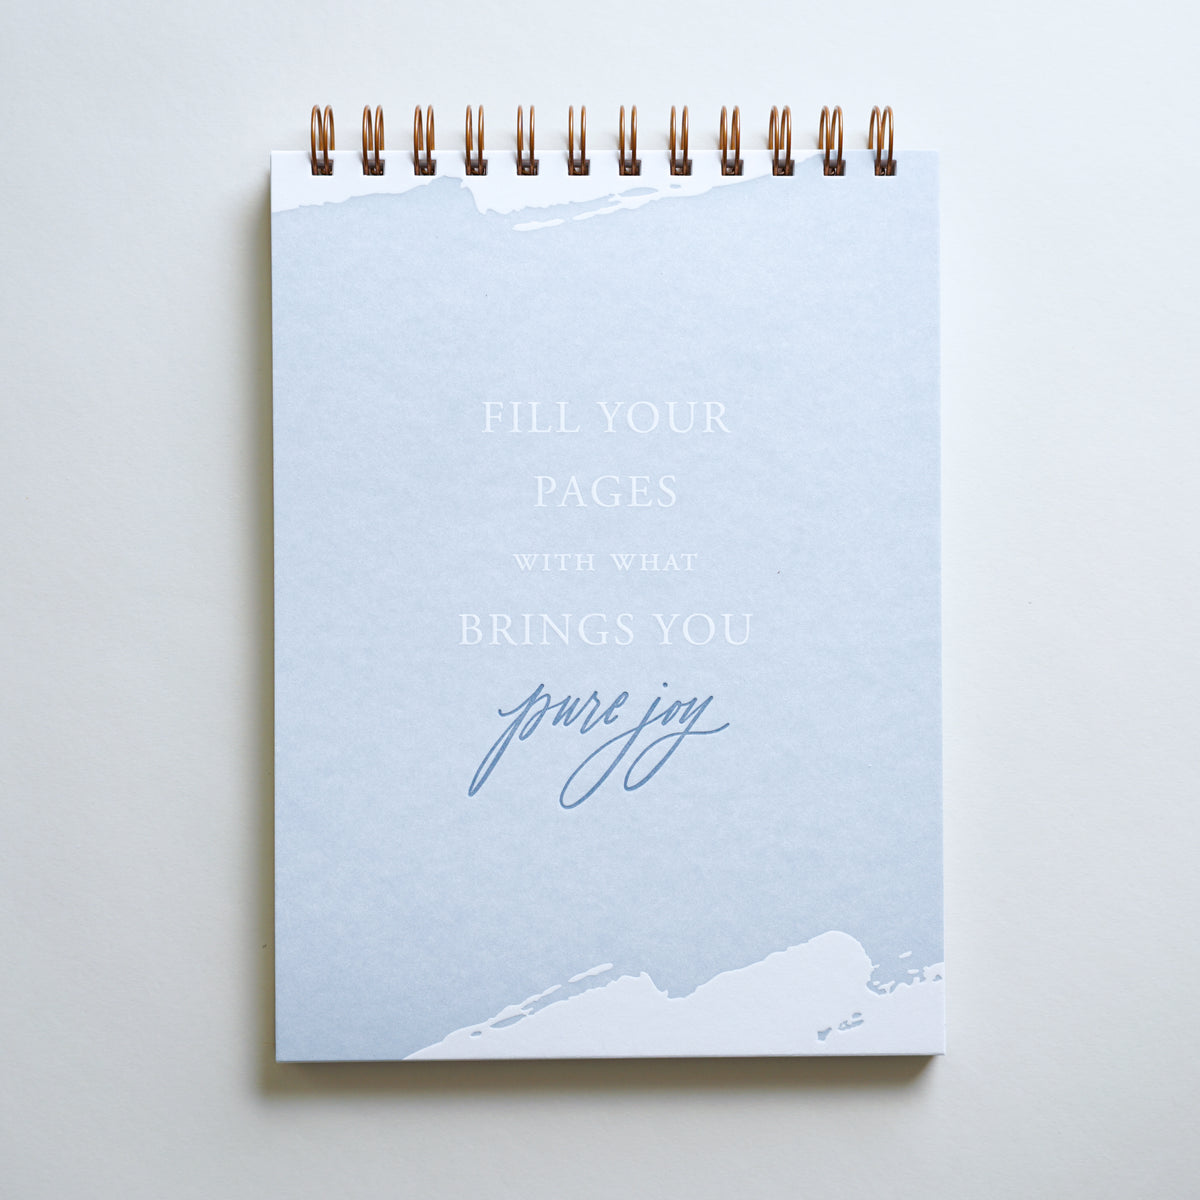 &quot;Pure Joy&quot; lined notebooks are letterpress printed by hand in light blue ink.